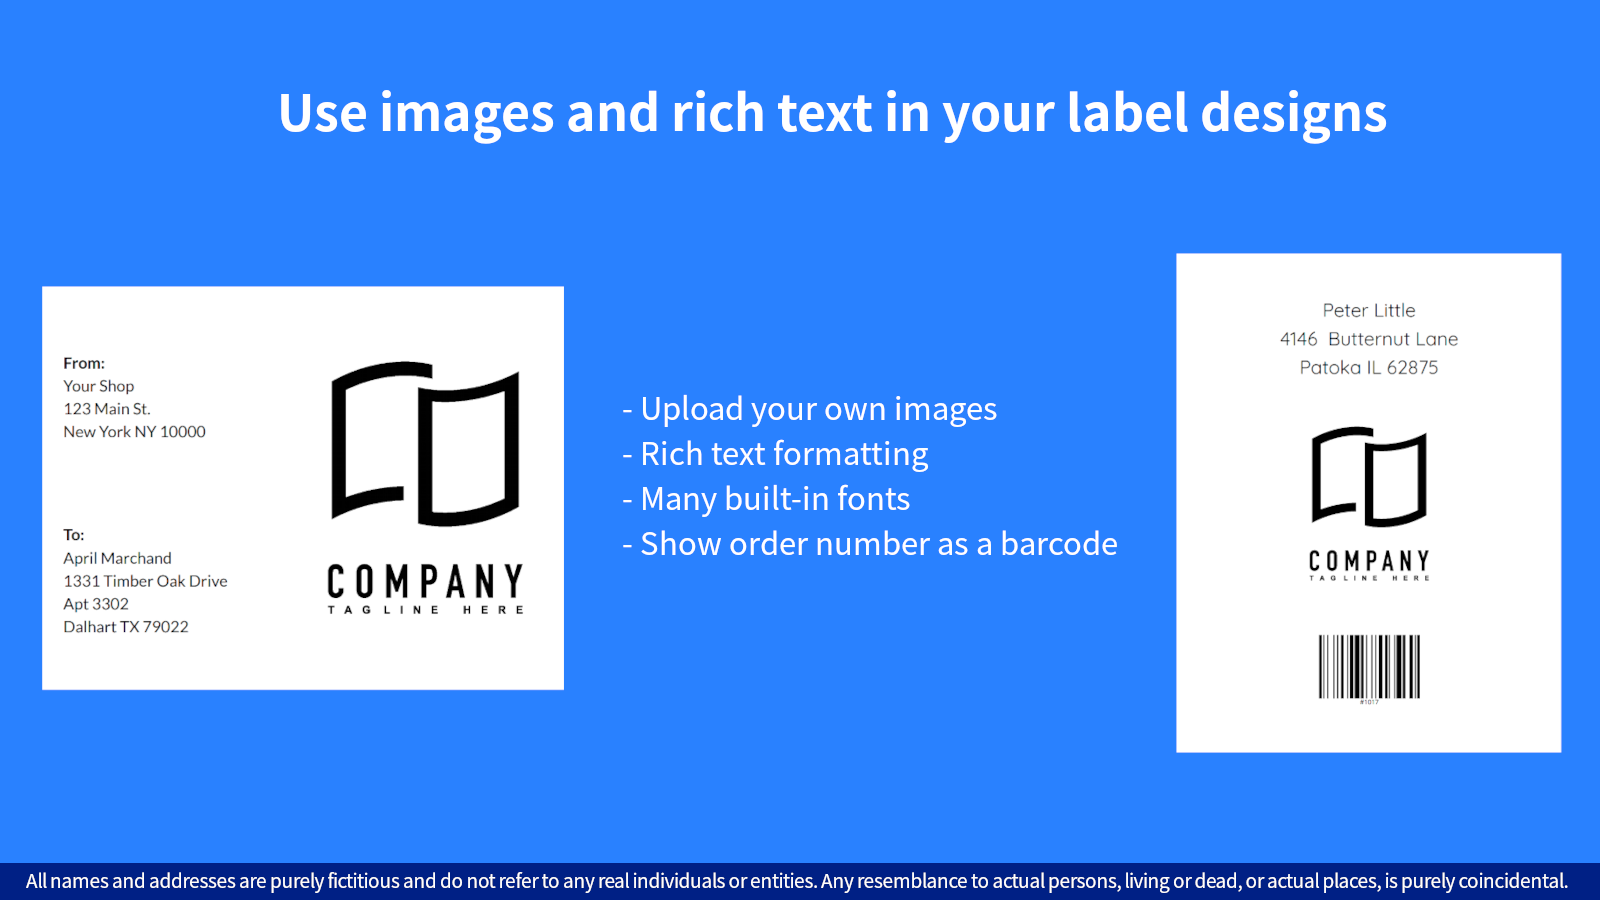 Use images and rich text in your label designs